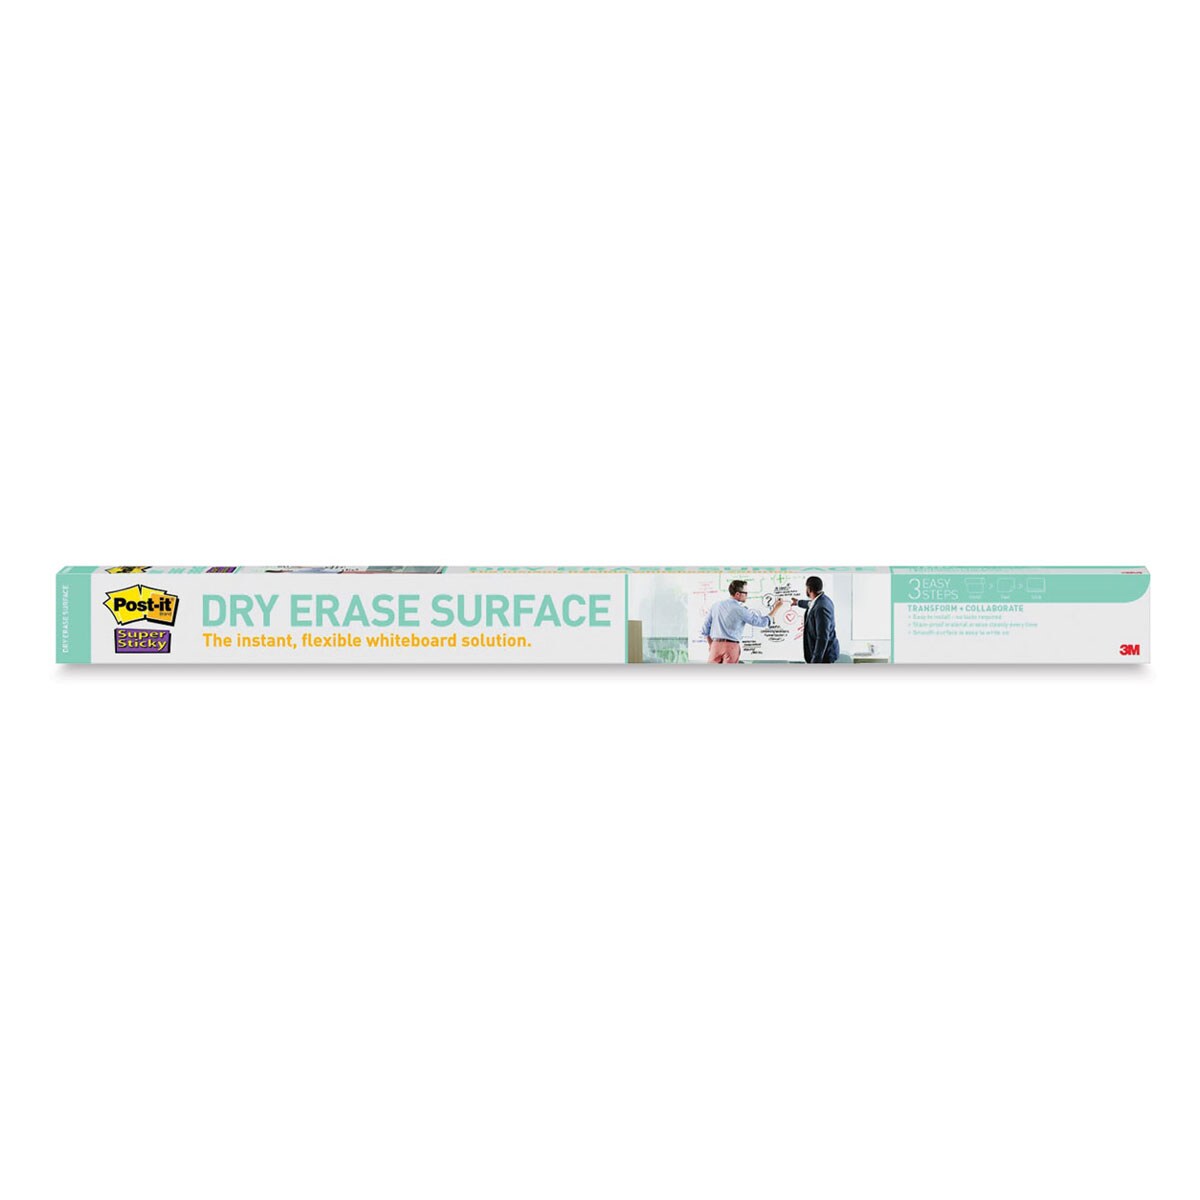 Post-it Super Sticky Dry Erase Surface - Roll, 3 ft x 4 ft